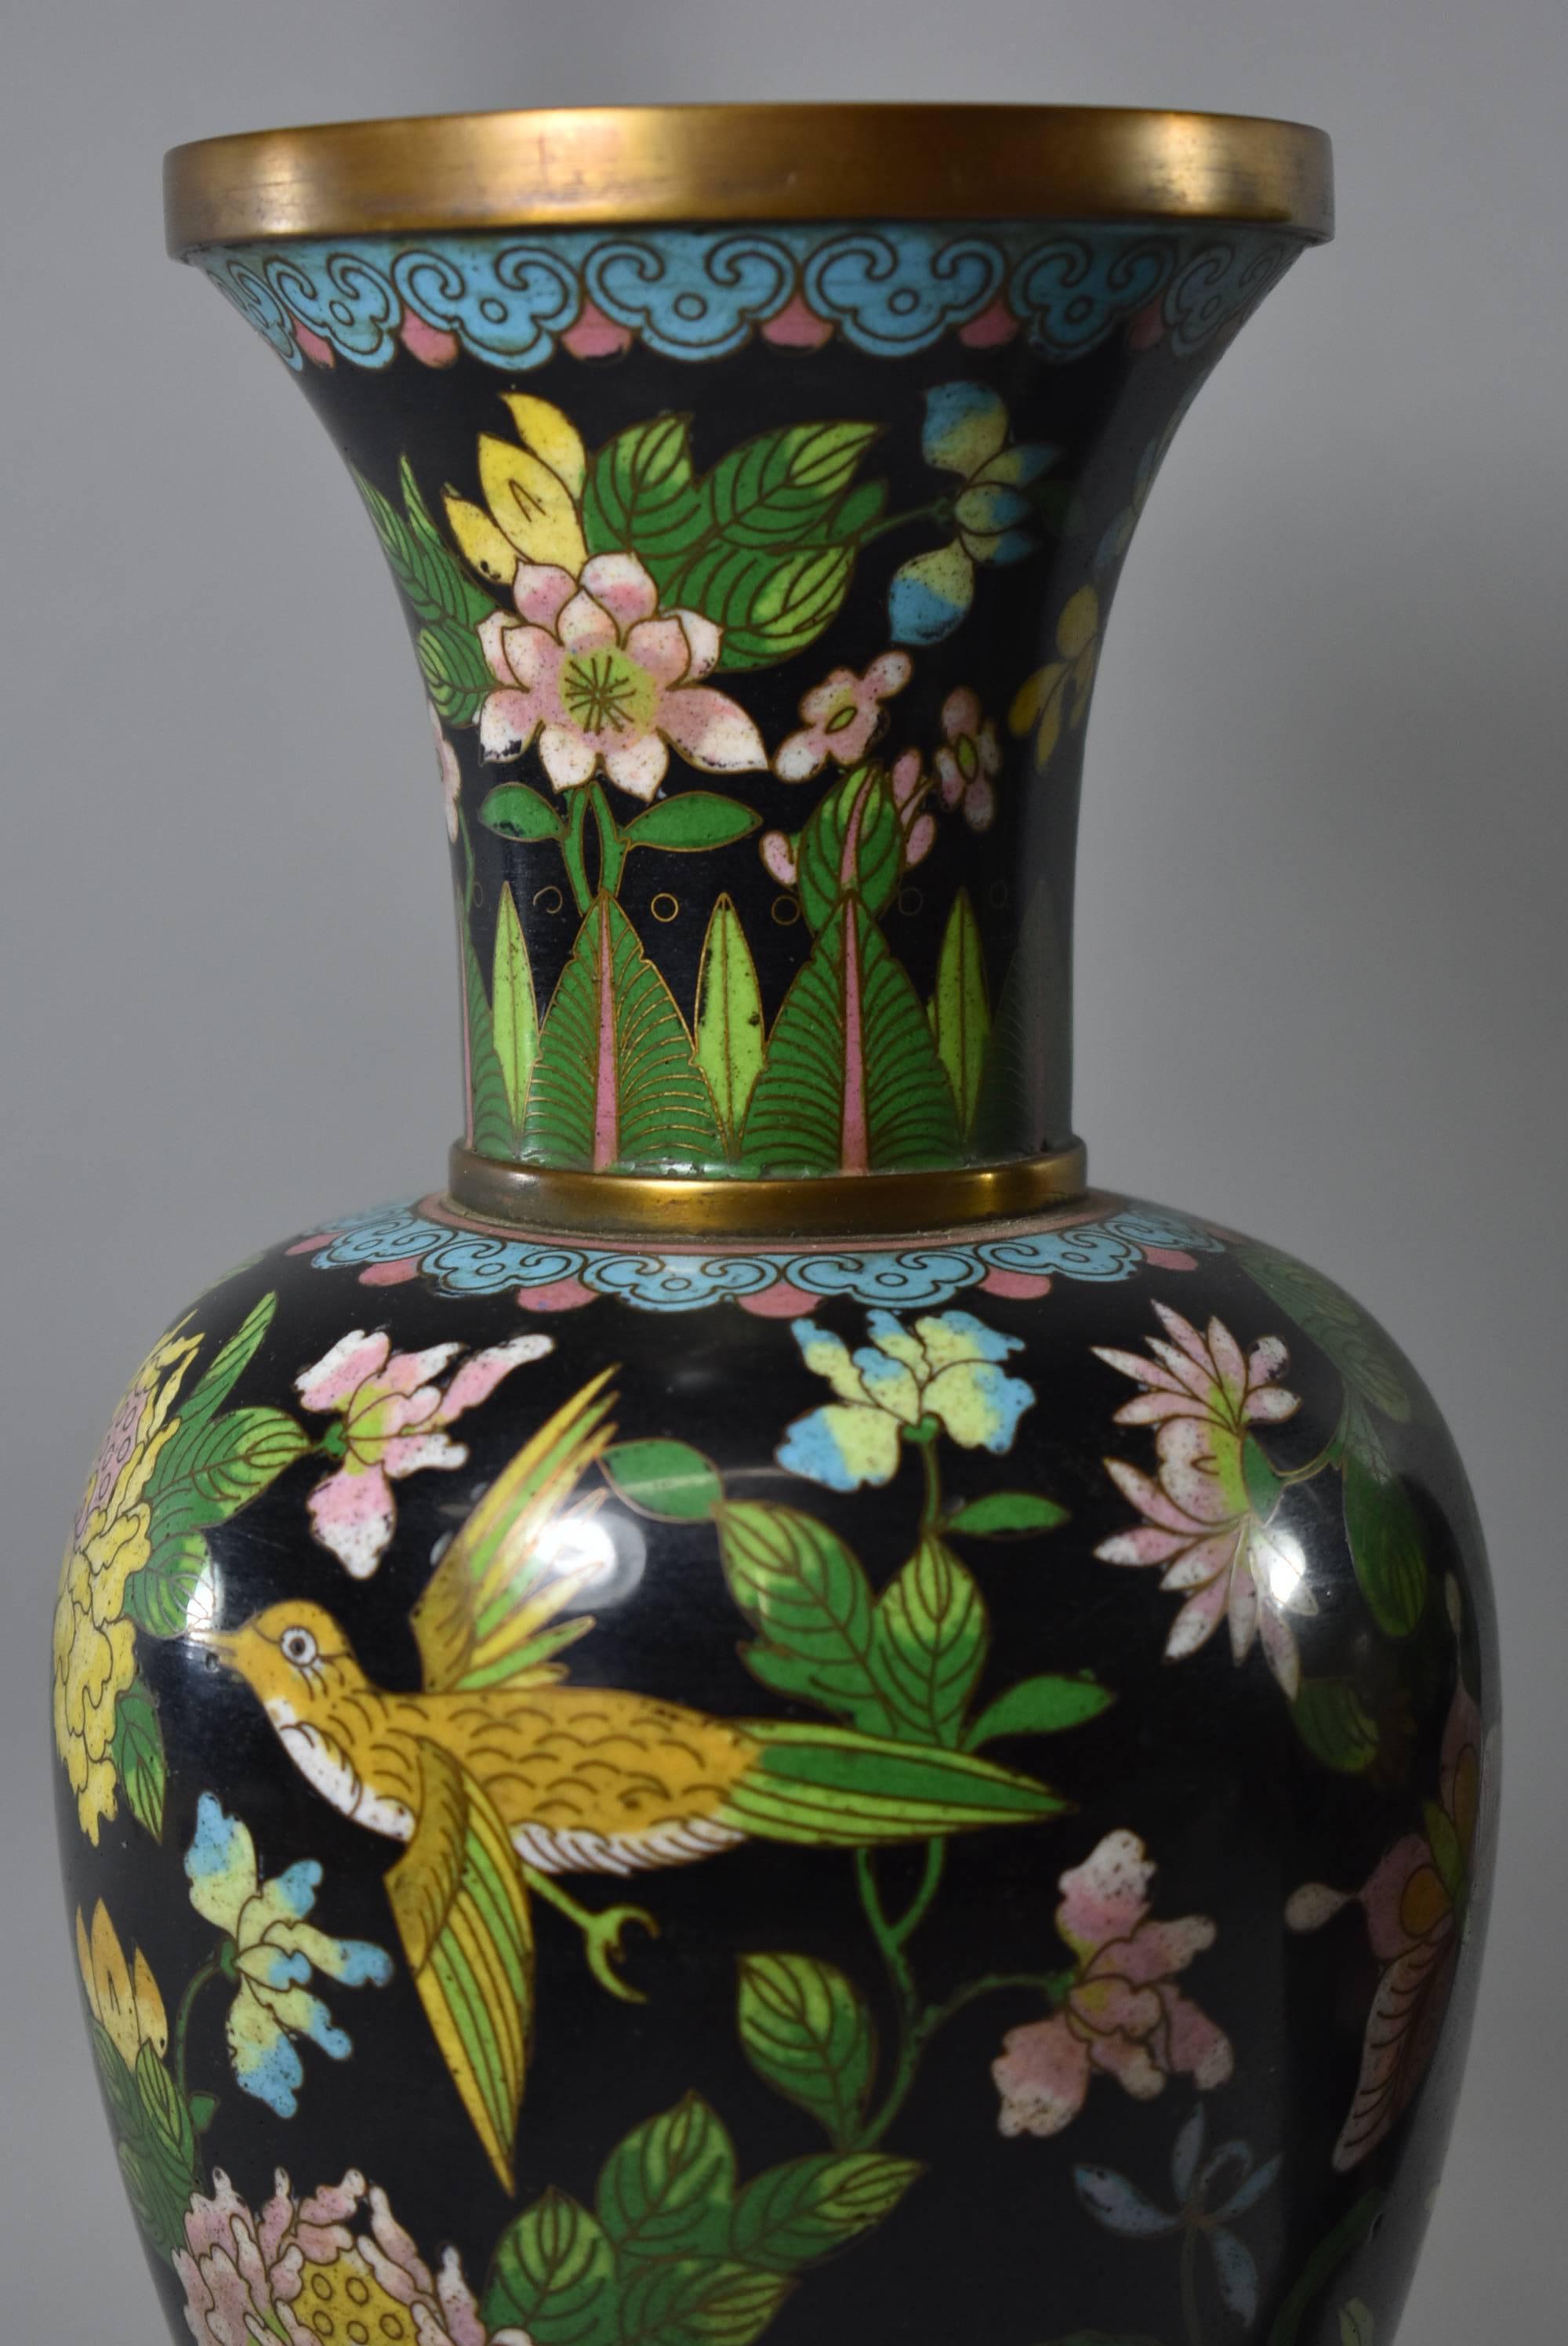 A beautiful pair of turn of the century Chinese cloisonne vases. These stunning vases features a black background with vibrant flowers, birds, butterflies and folilage. The brass body is 12.5